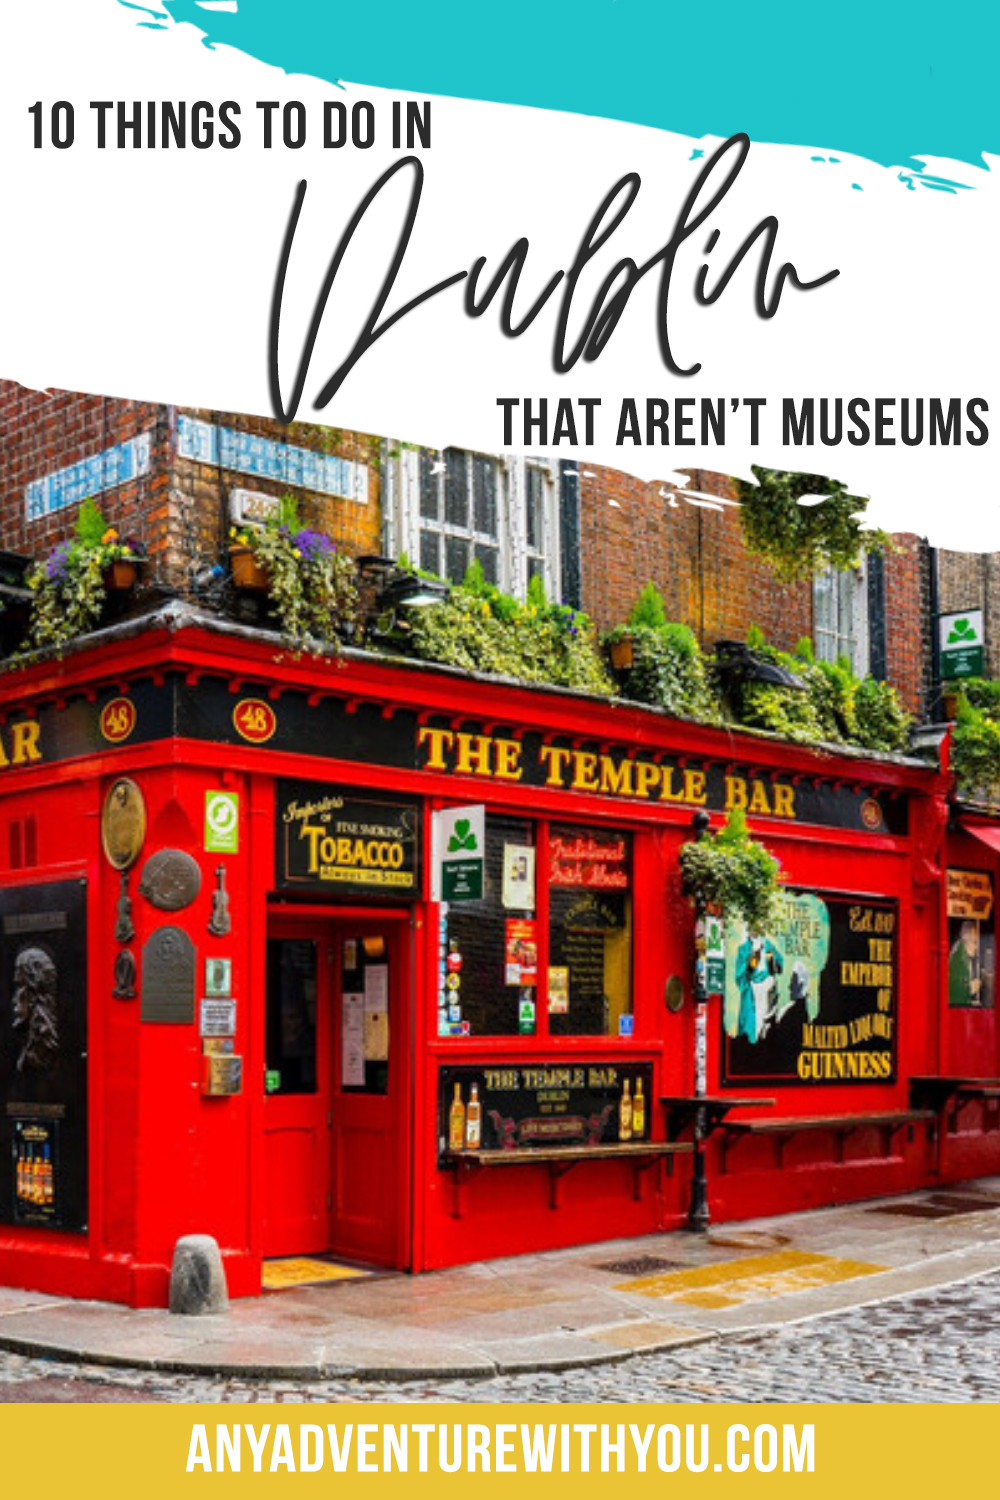 There are many things to do in Dublin, but if you aren’t interested in history, but may feel overwhelmed. Here are 10 things to do in Ireland’s capital that are more than museums. #Dublin #DublinTravel #Ireland #IrelandTravel #TravelTips